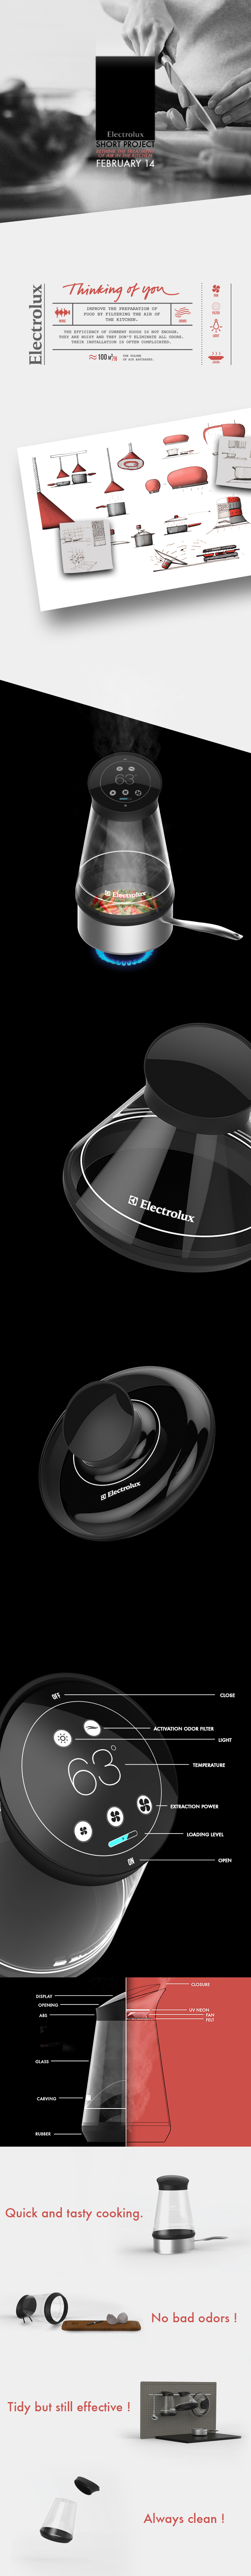 electrolux design award hood hotte   aspirant ISD short project contest Solidworks air purifier